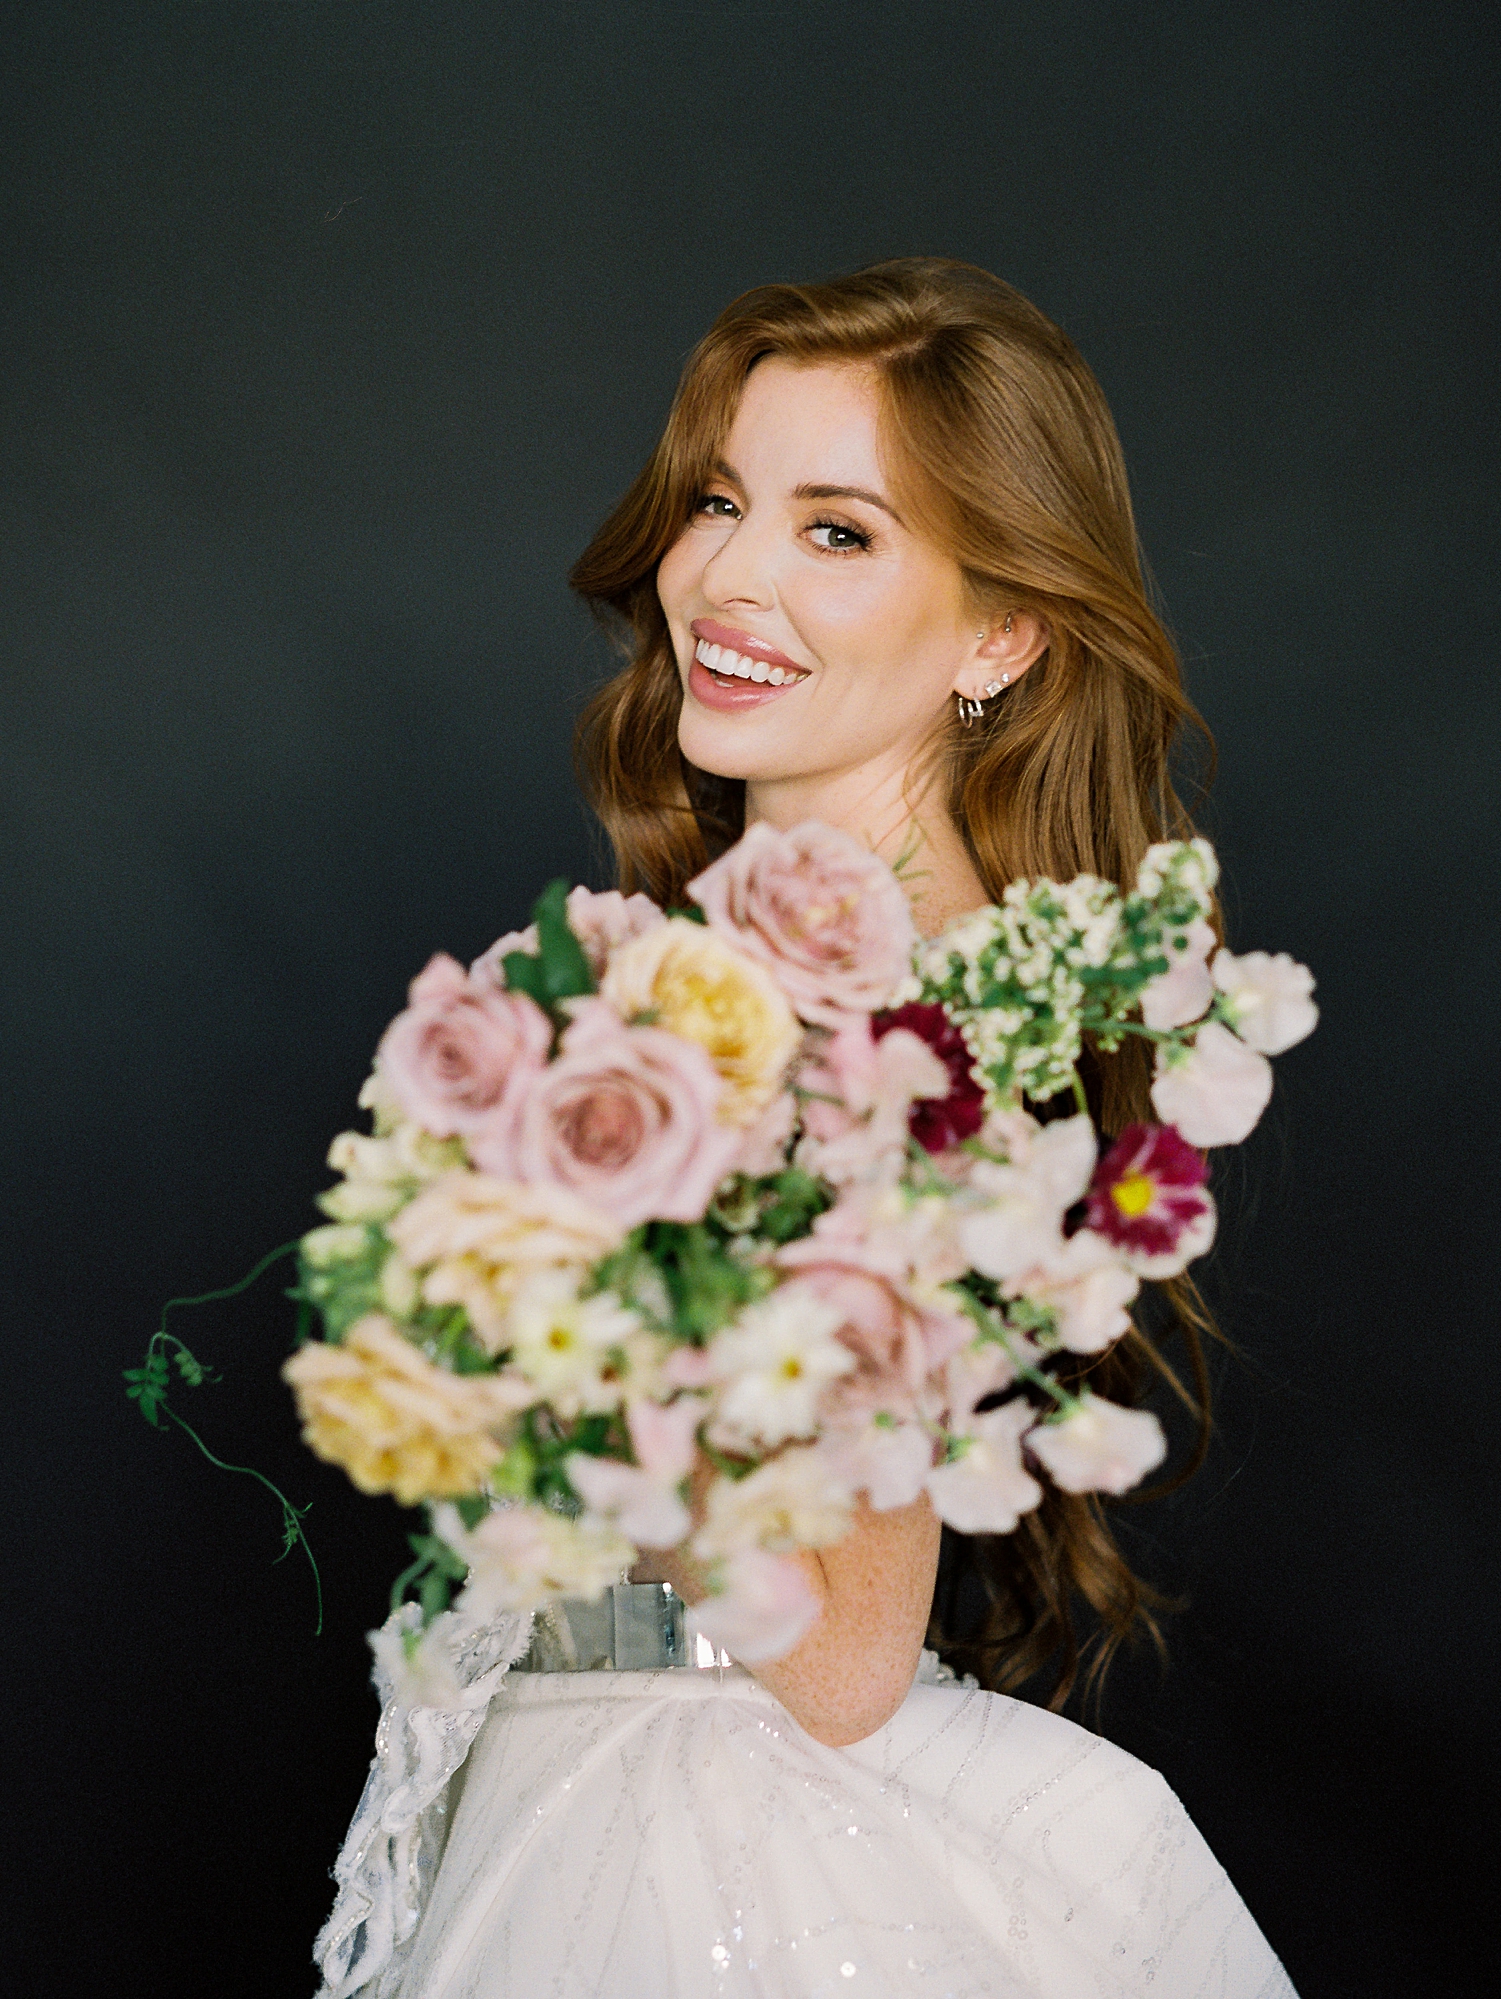 red headed bride holding colorful bridal bouquet